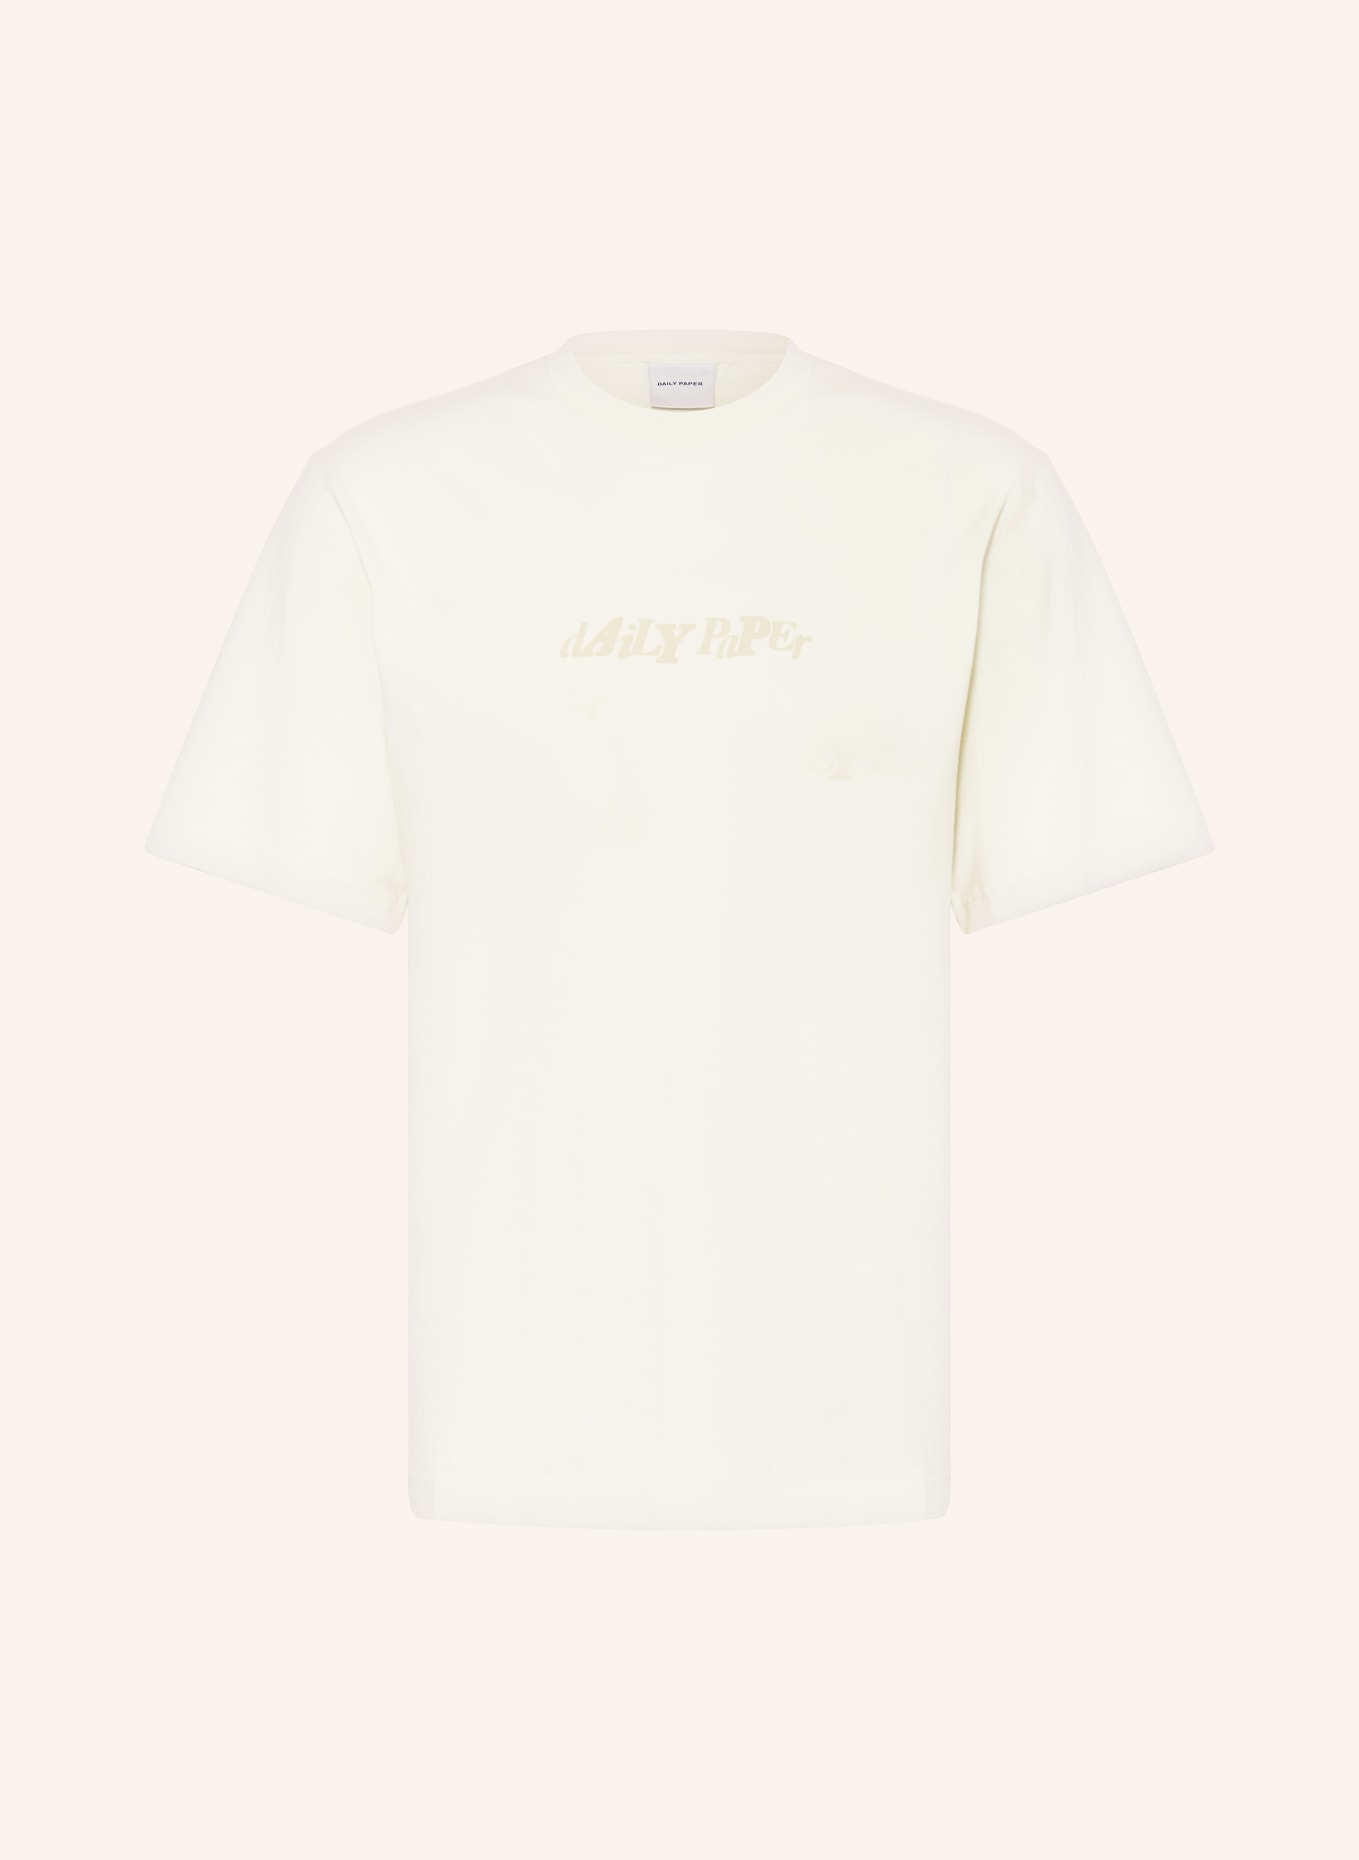 DAILY PAPER T-shirt UNIFIED TYPE, Color: LIGHT YELLOW (Image 1)